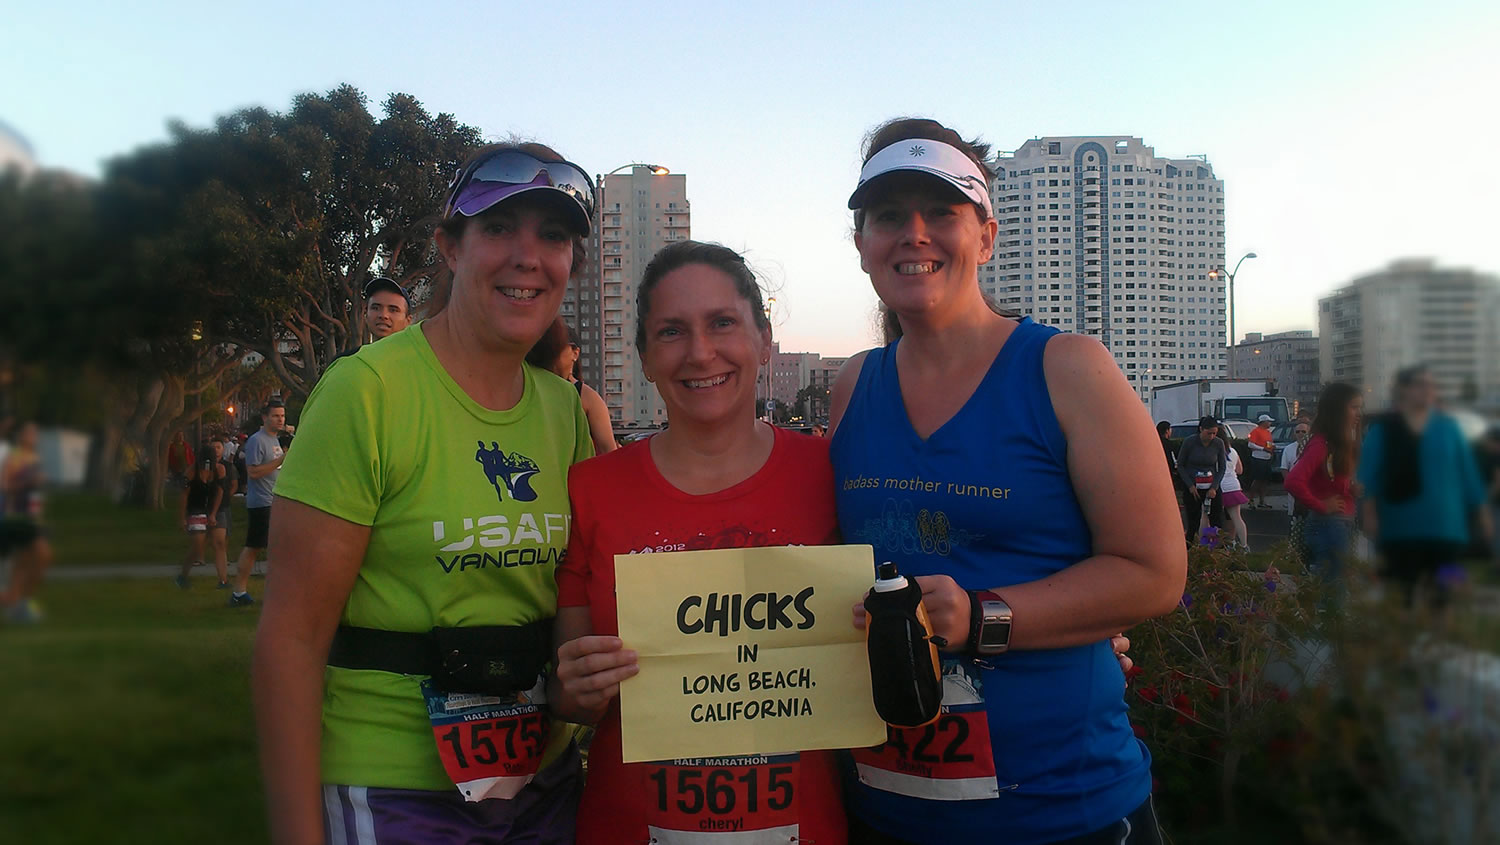 Robin Wild, Cheryl Wandro and Shelly Atwell are Clark County women who completed the Long Beach (Calif.) Half Marathon on Sunday and are entered in Sunday's Girlfriends Half Marathon in downtown Vancouver.